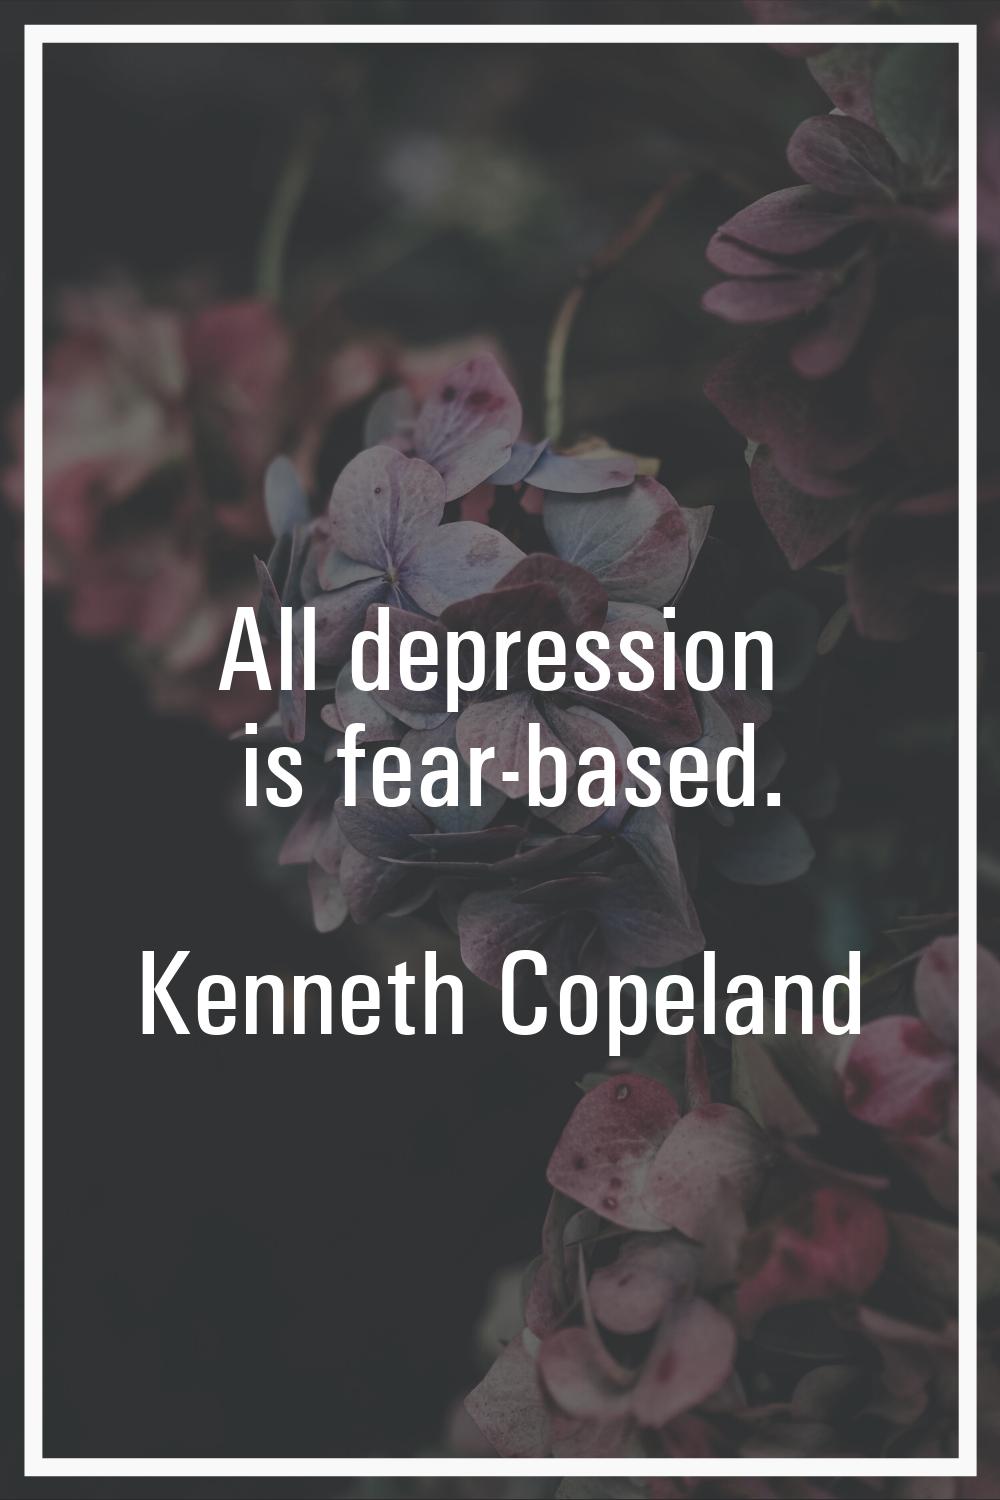 All depression is fear-based.